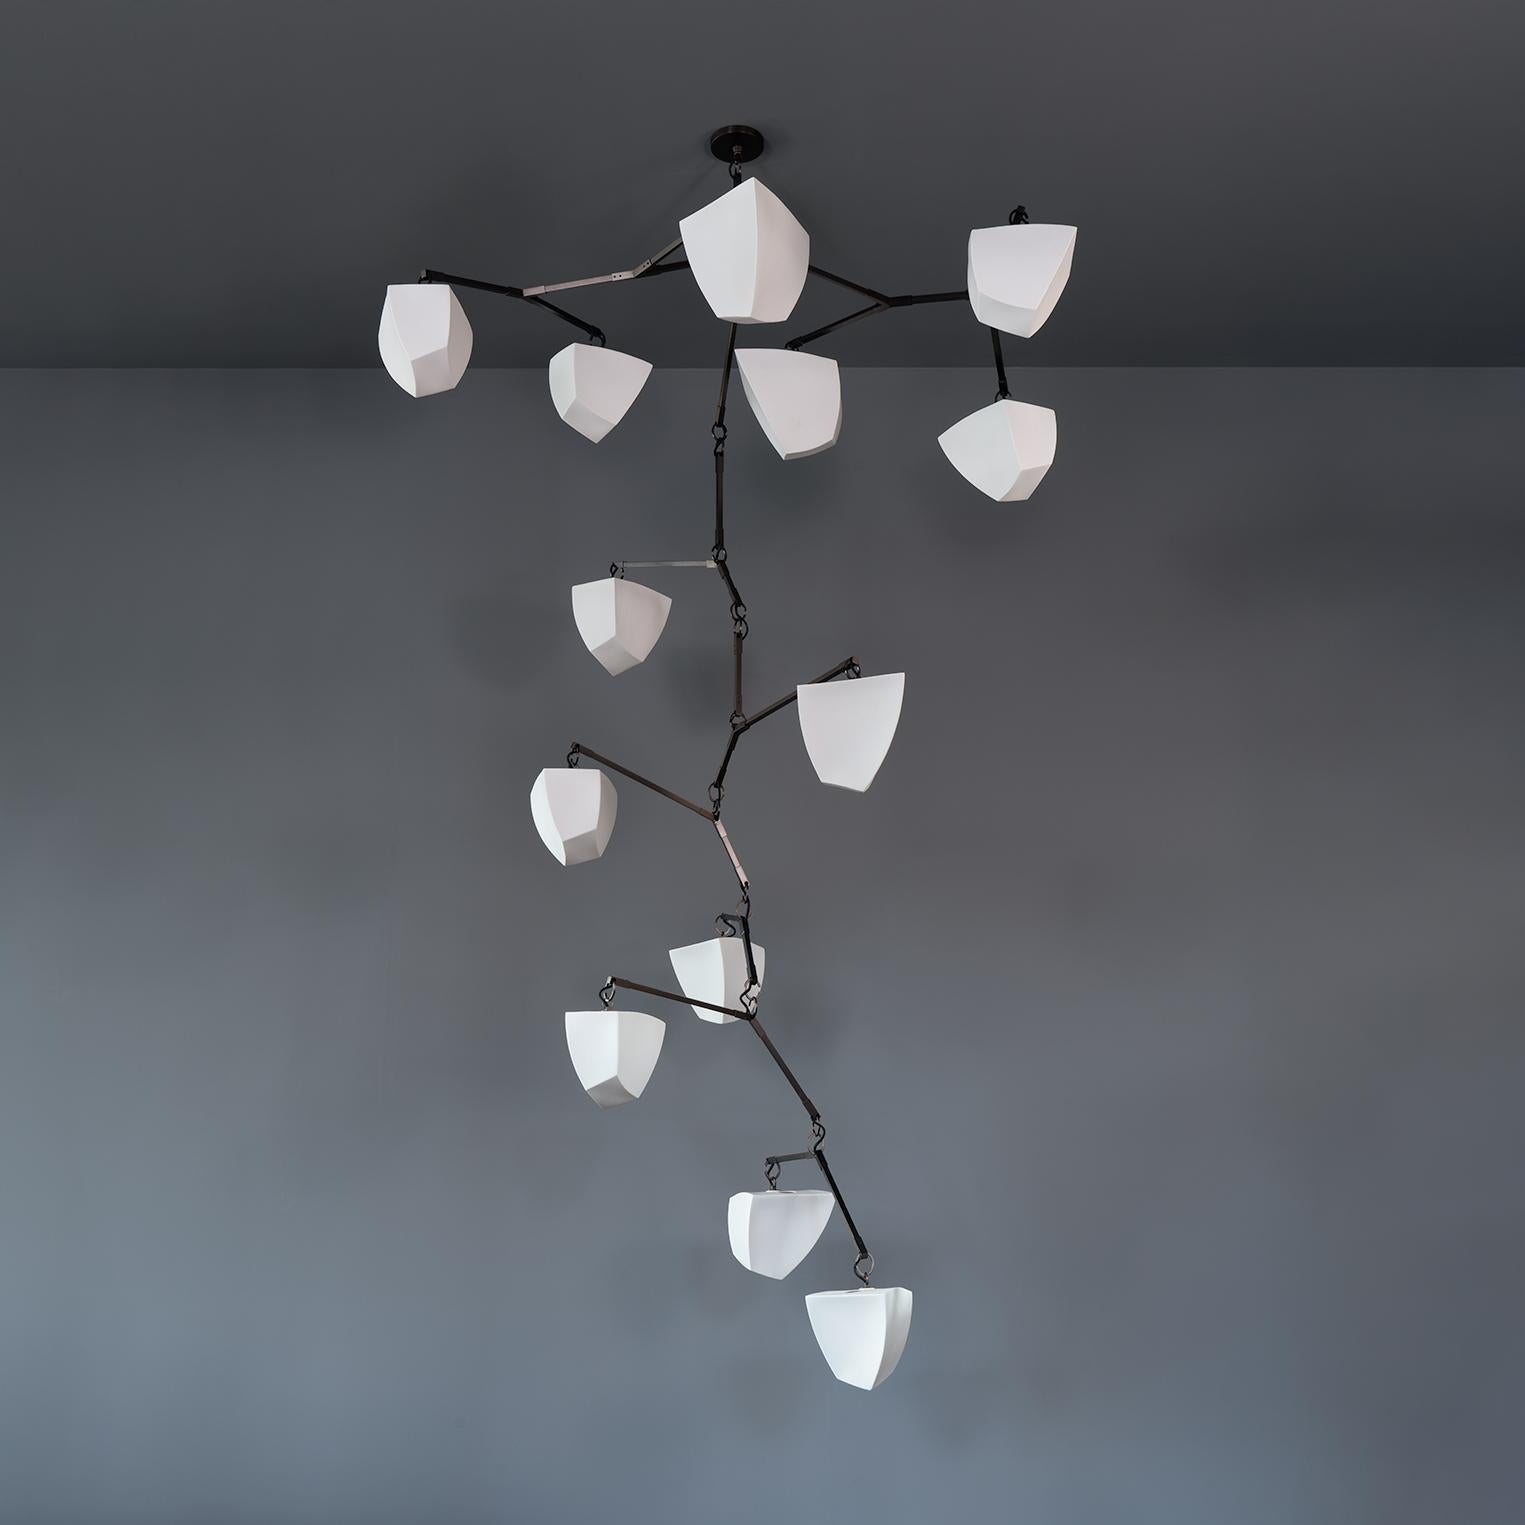 Galaxy 13: Porcelain Mobile Chandelier is a large mobile chandelier with thirteen handmade translucent porcelain polyhedron shades in 2 sizes. 

This configuration was designed to float horizontally and vertically extending in two directions and